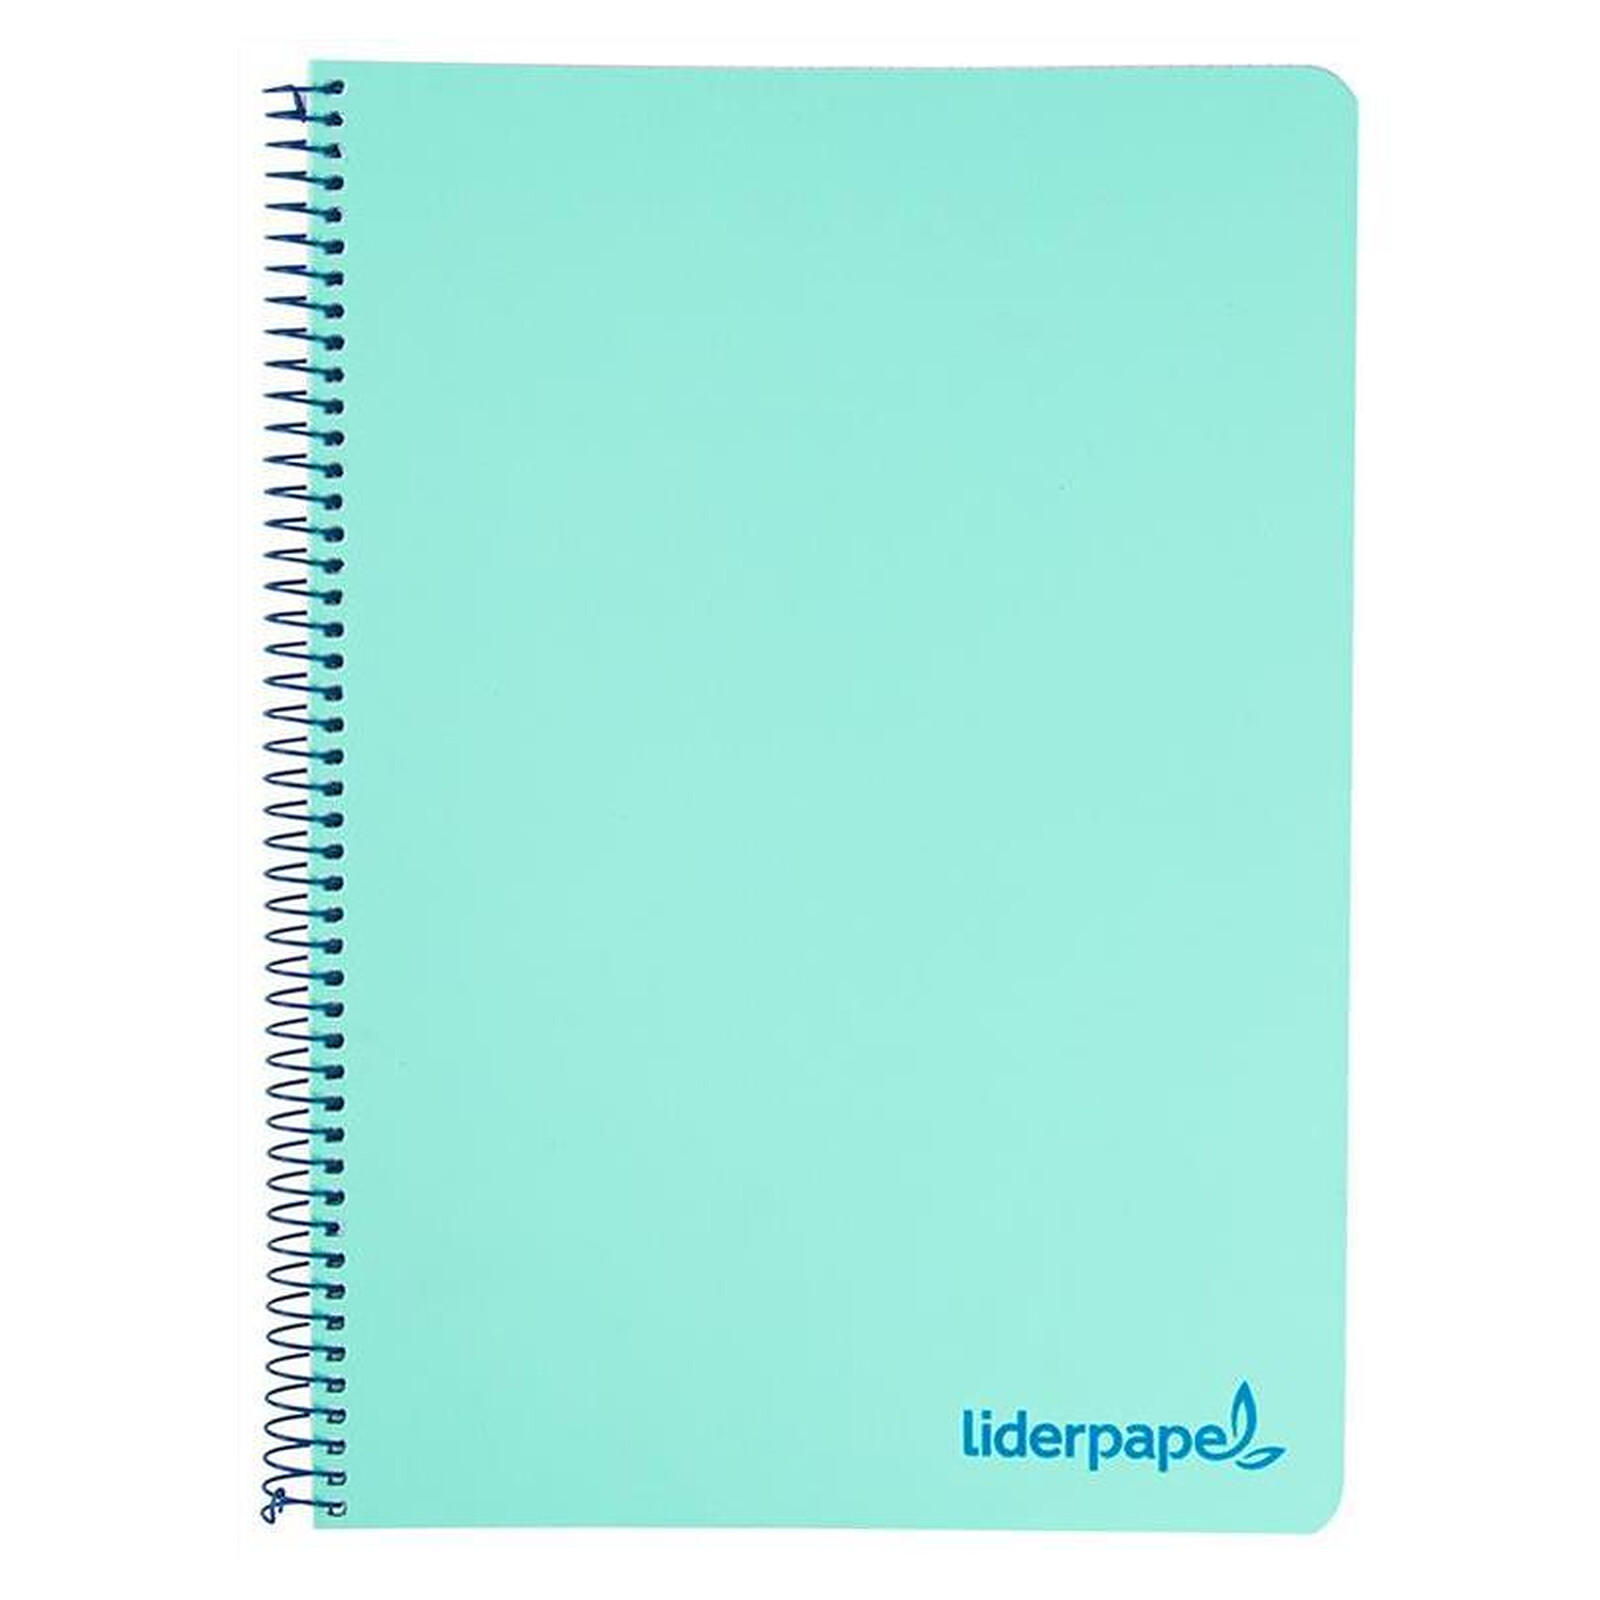 LIDERPAPEL Cahier spirale A6 Micro Wonder 240 pages 90g 5x5mm 4 bandes Vert  - Cahier - LDLC